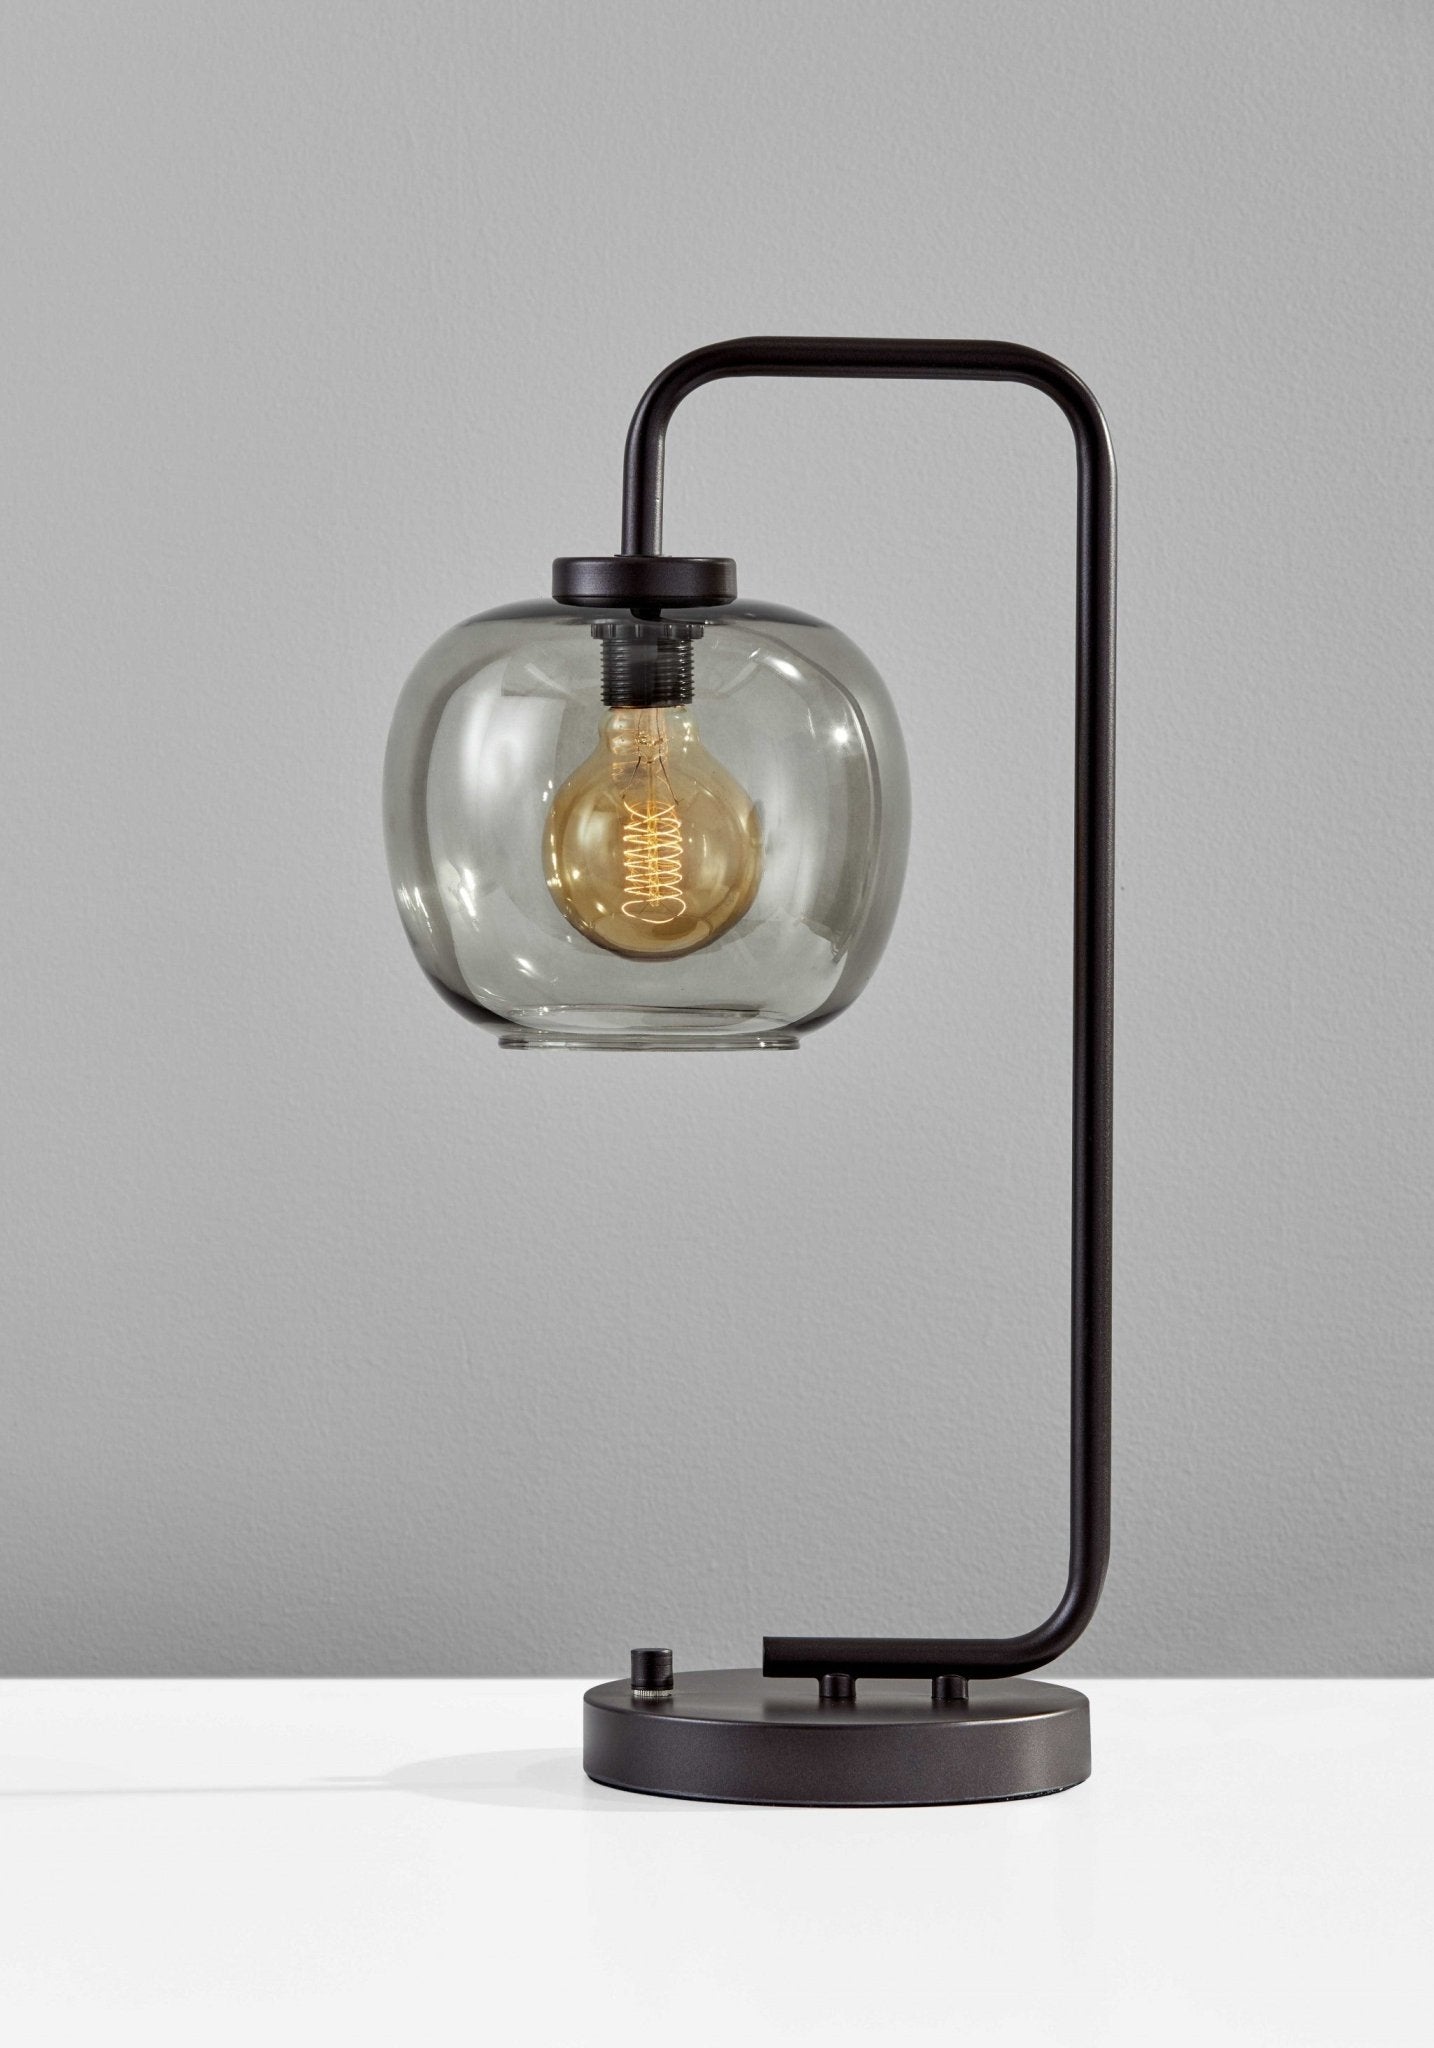 Smoked-Glass-Globe-Shade-With-Vintage-Edison-Bulb-And-Matte-Black-Metal-Arc-Table-Lamp-Table-Lamps